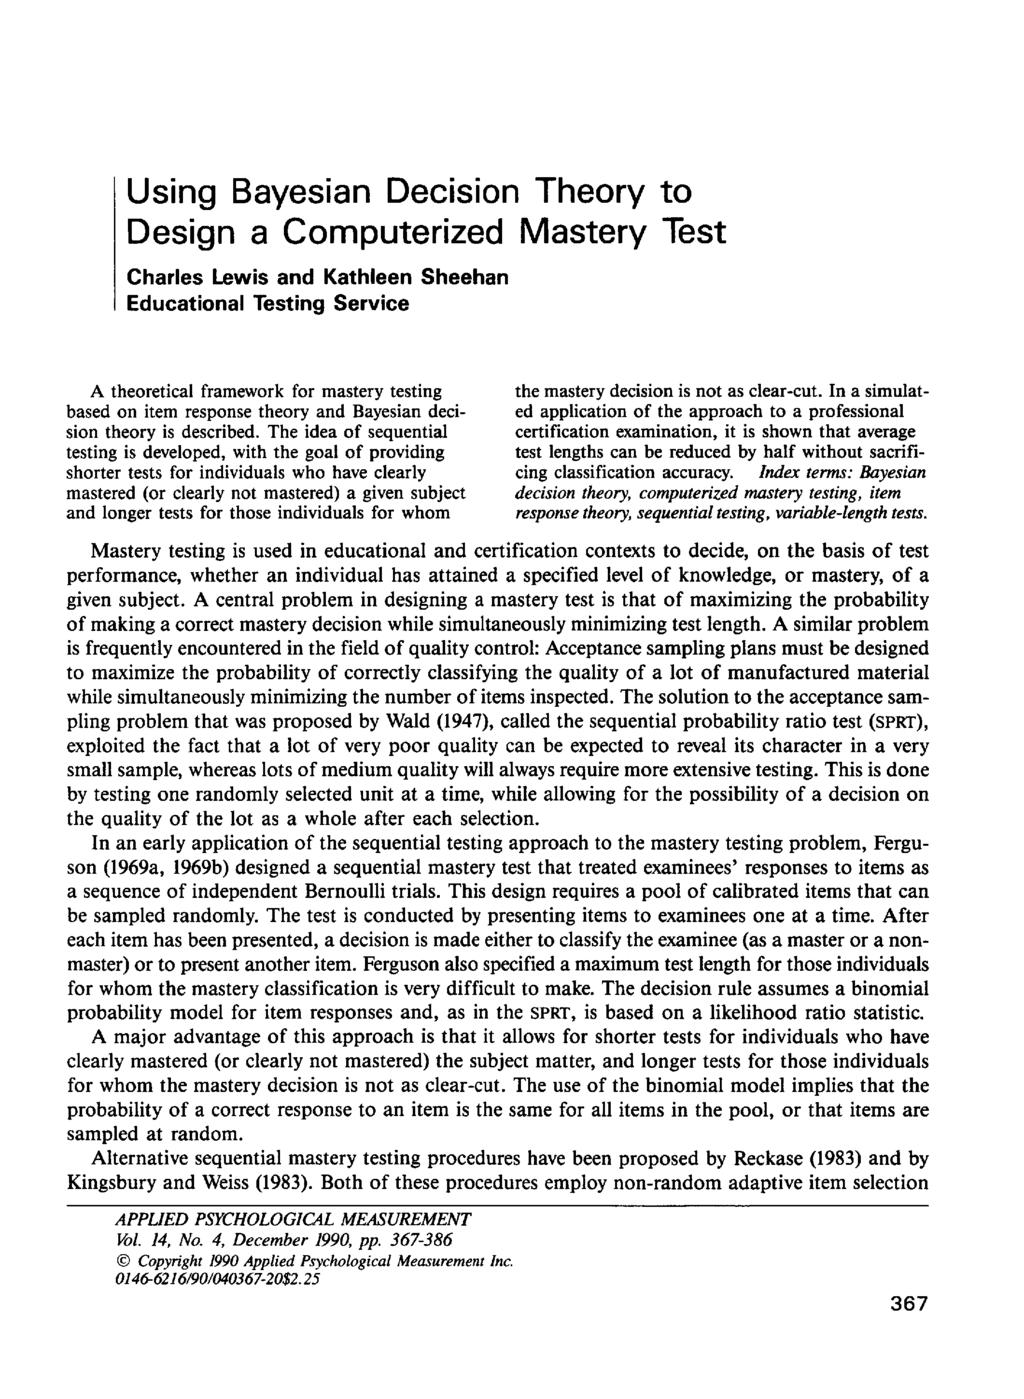 Using Bayesian Decision Theory to Design a Computerized Mastery Test Charles Lewis and Kathleen Sheehan Educational Testing Service A theoretical framework for mastery testing based on item response